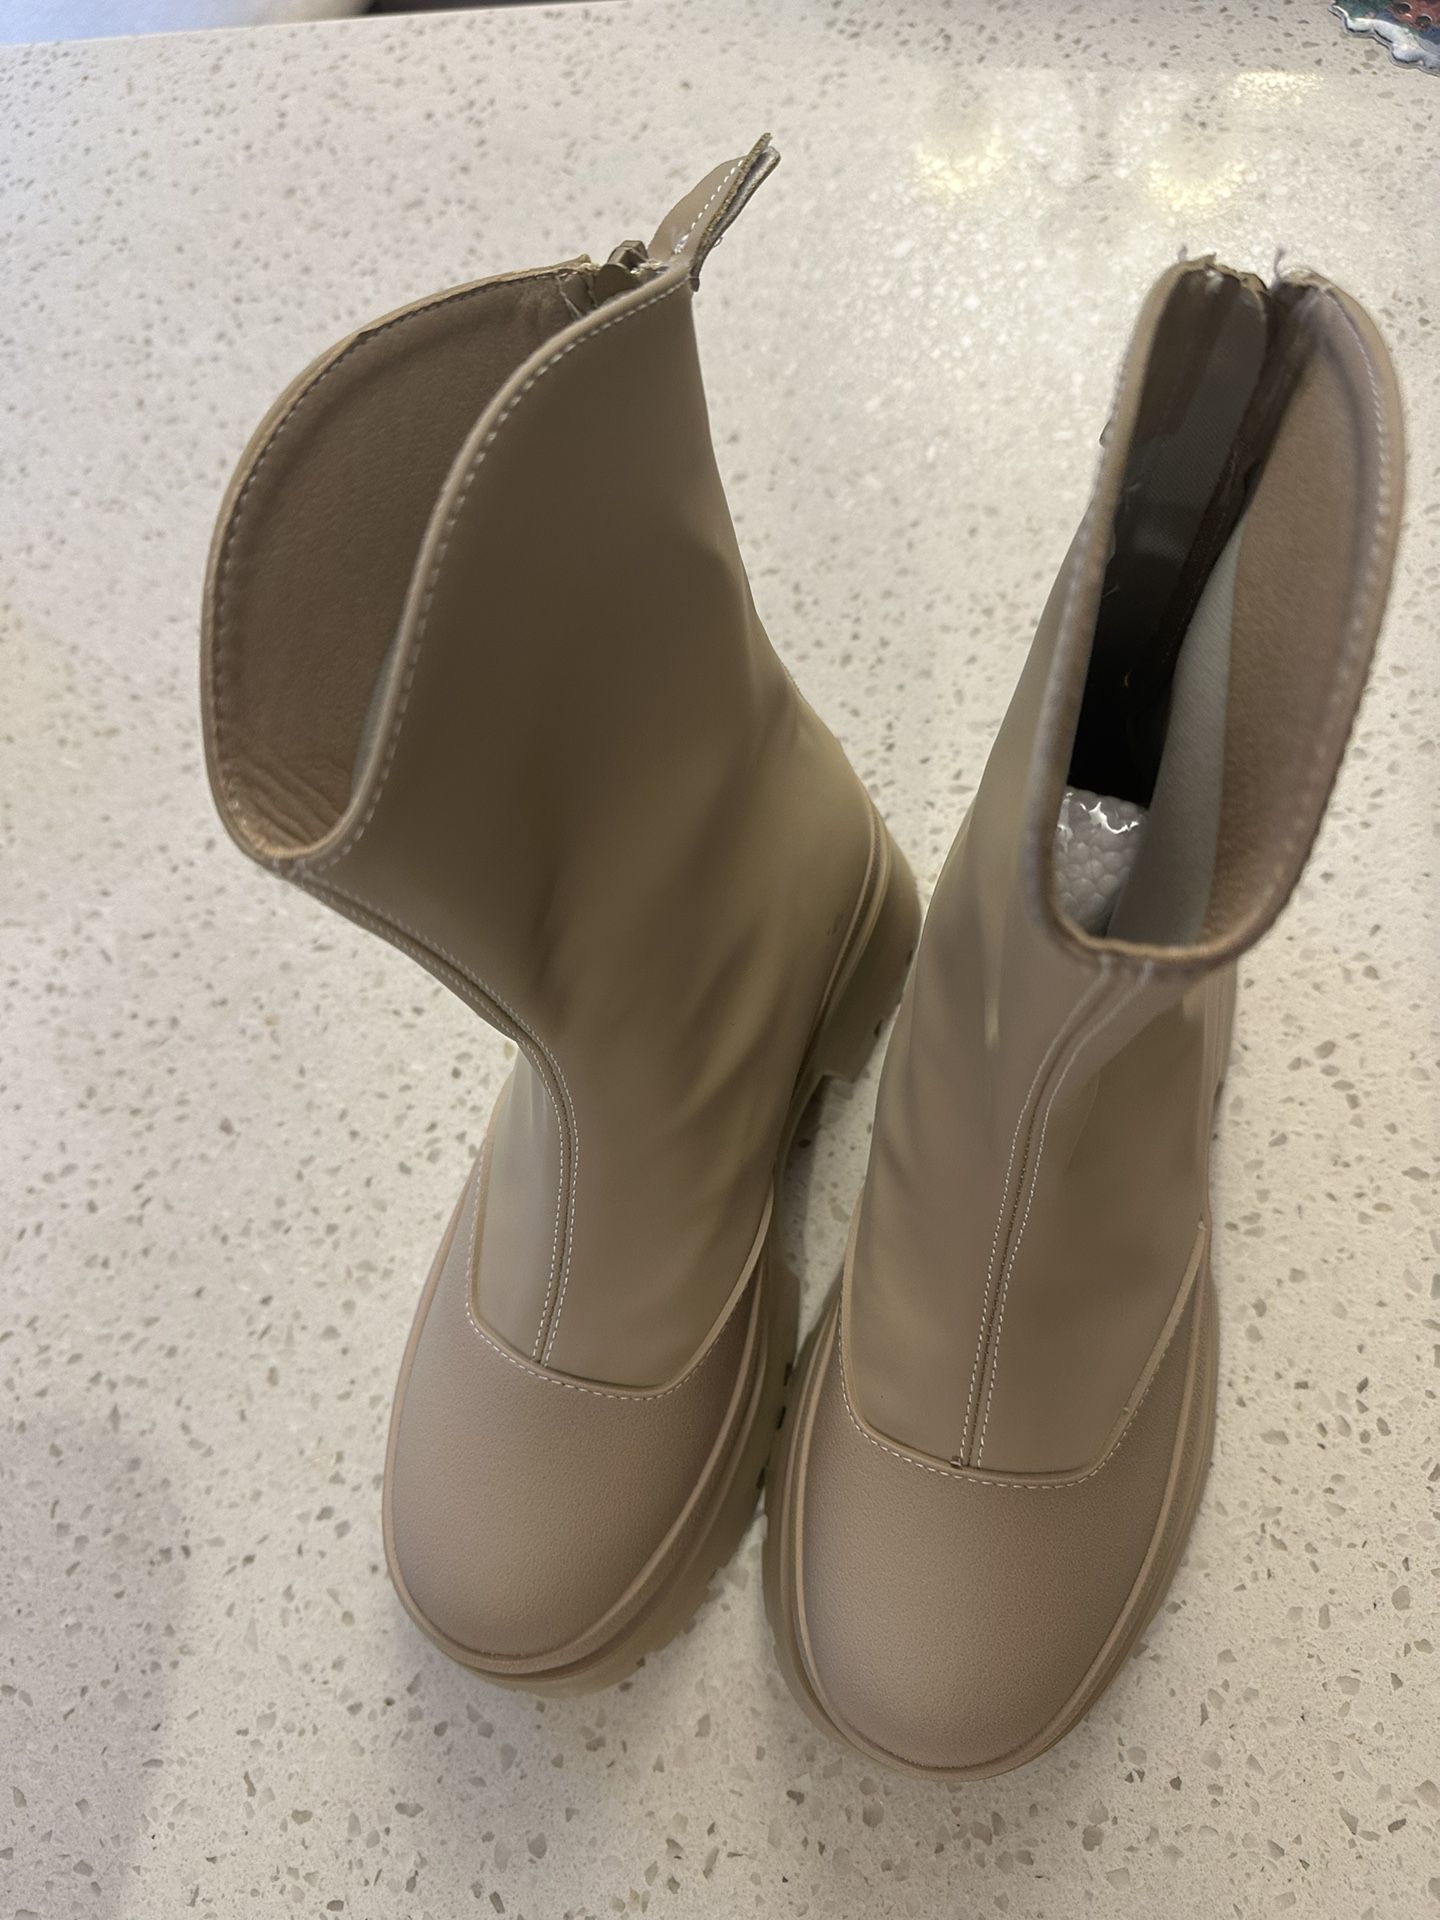 Boots For Women Size 6